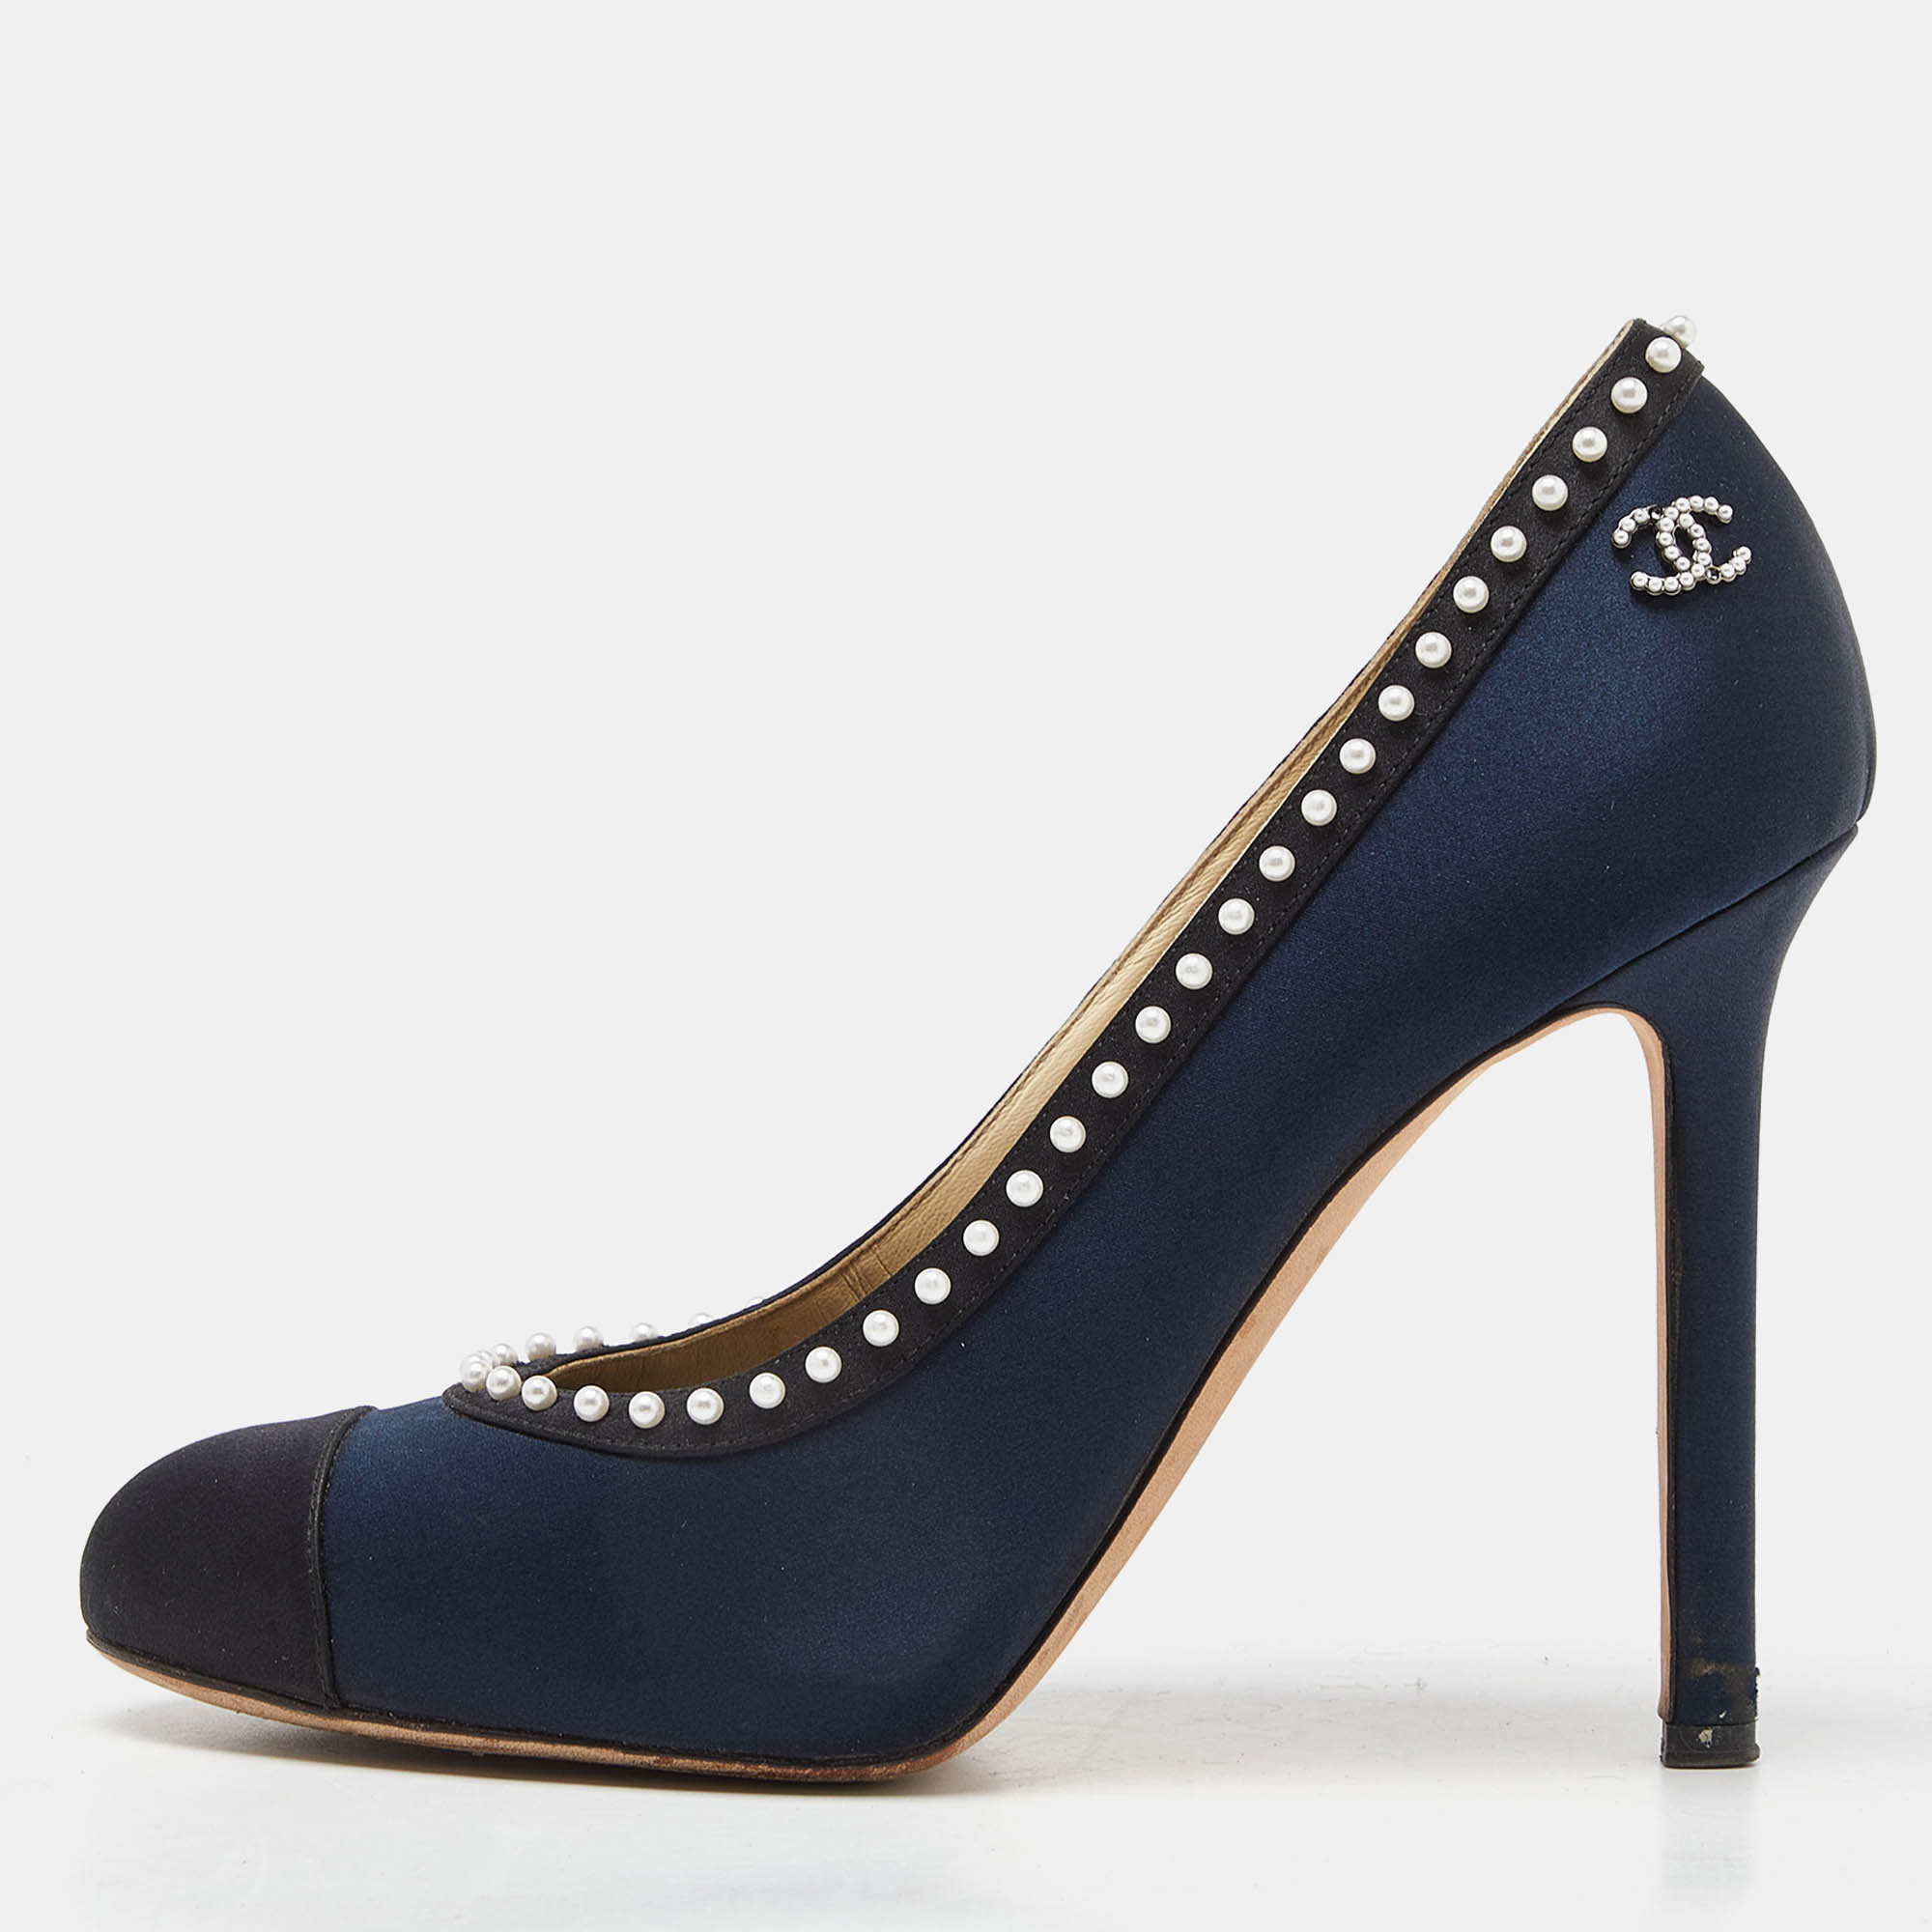 Pre-owned Chanel Navy Blue/black Satin Cc Pearl Embellished Pumps Size 37.5